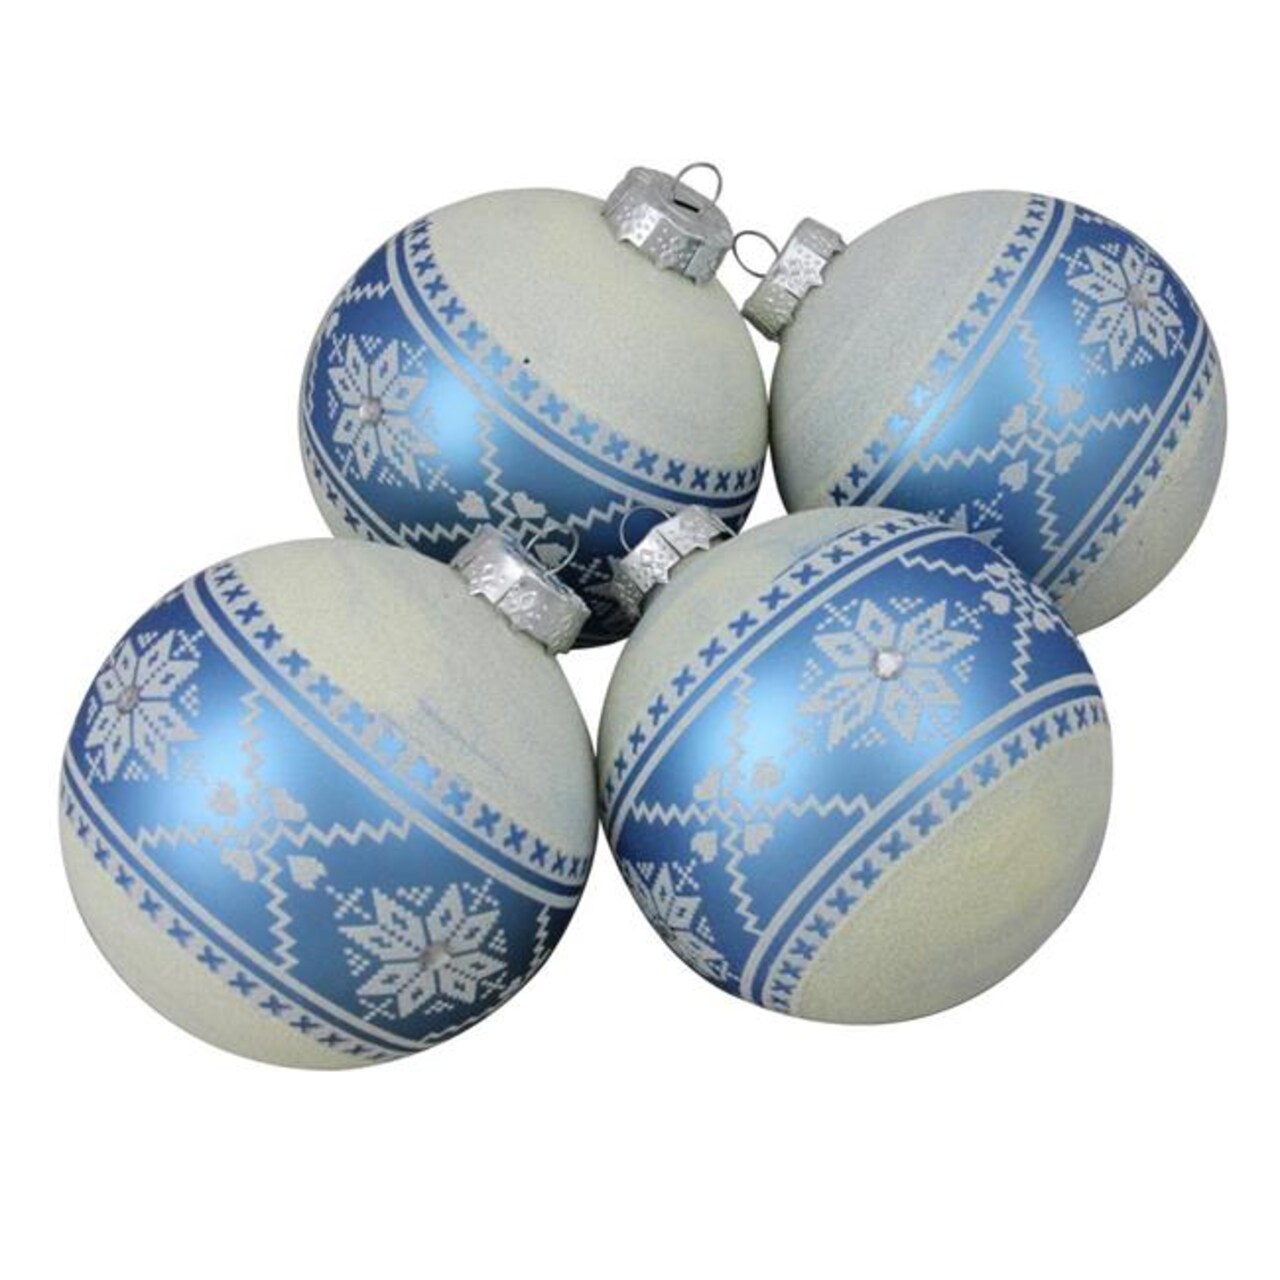 Northlight 32614130 4 in. 4 - Piece Set of Silver Glitter Nordic Patterned Glass Ball Christmas Ornaments